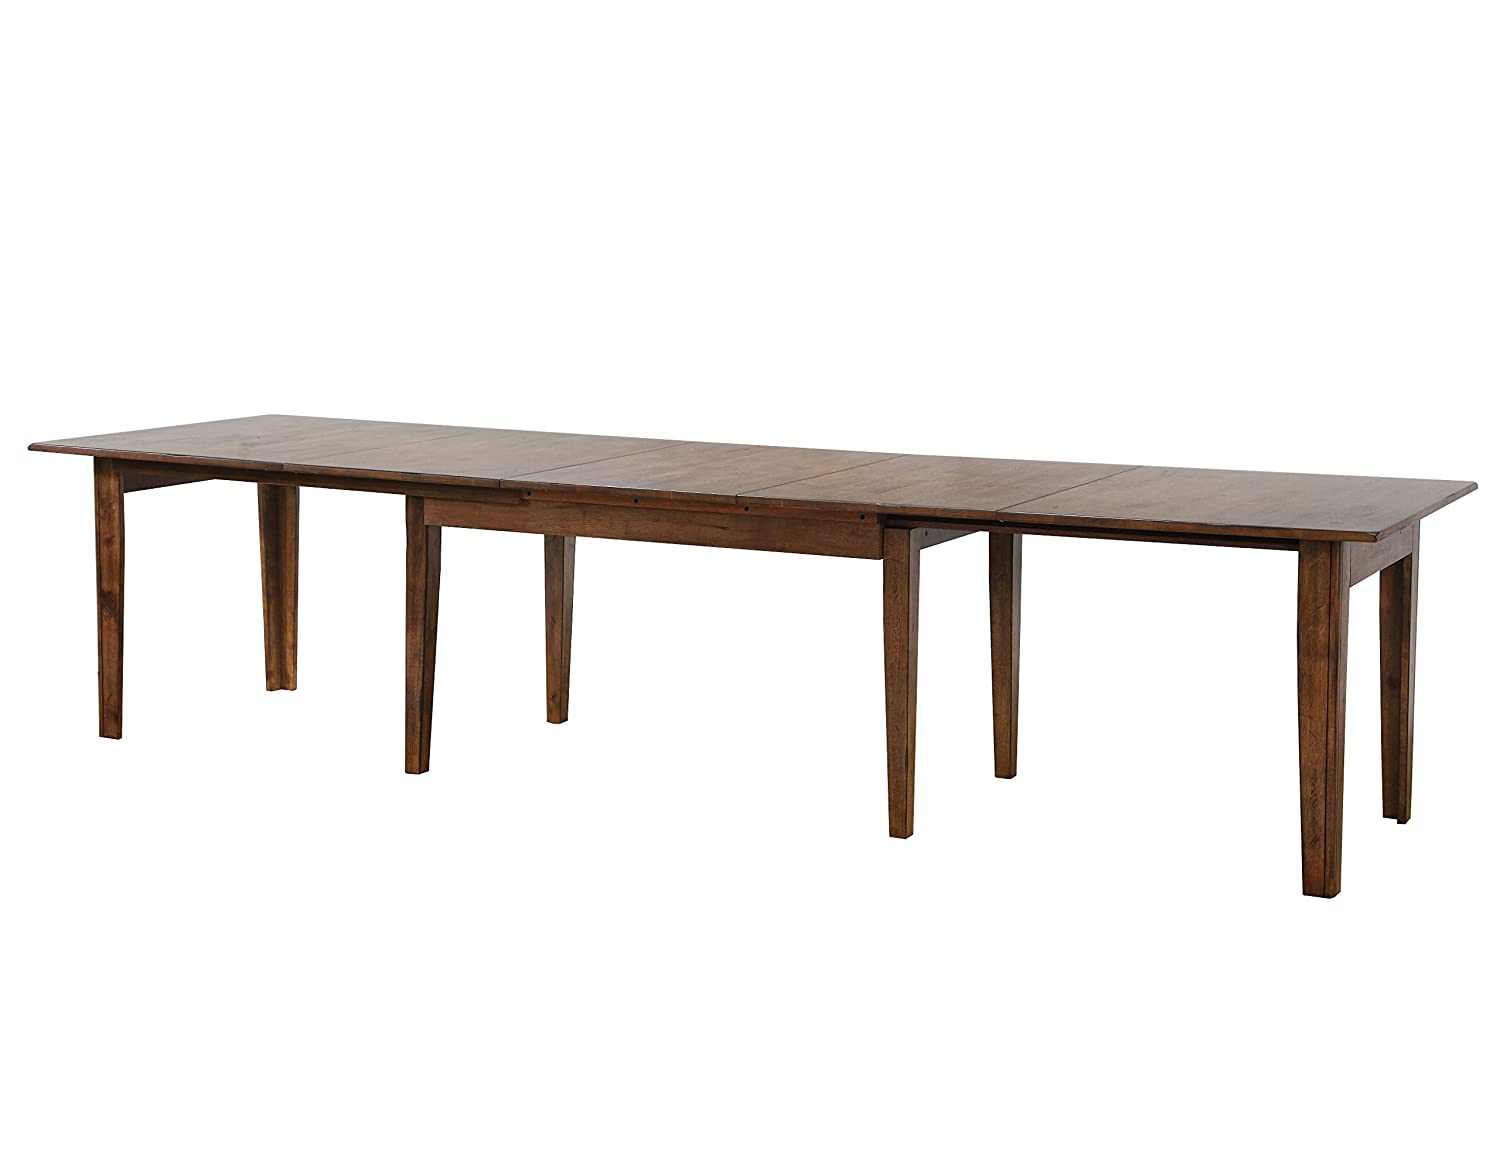 B07LD6XCRY Sunset Trading Simply Brook Table, Amish Brown